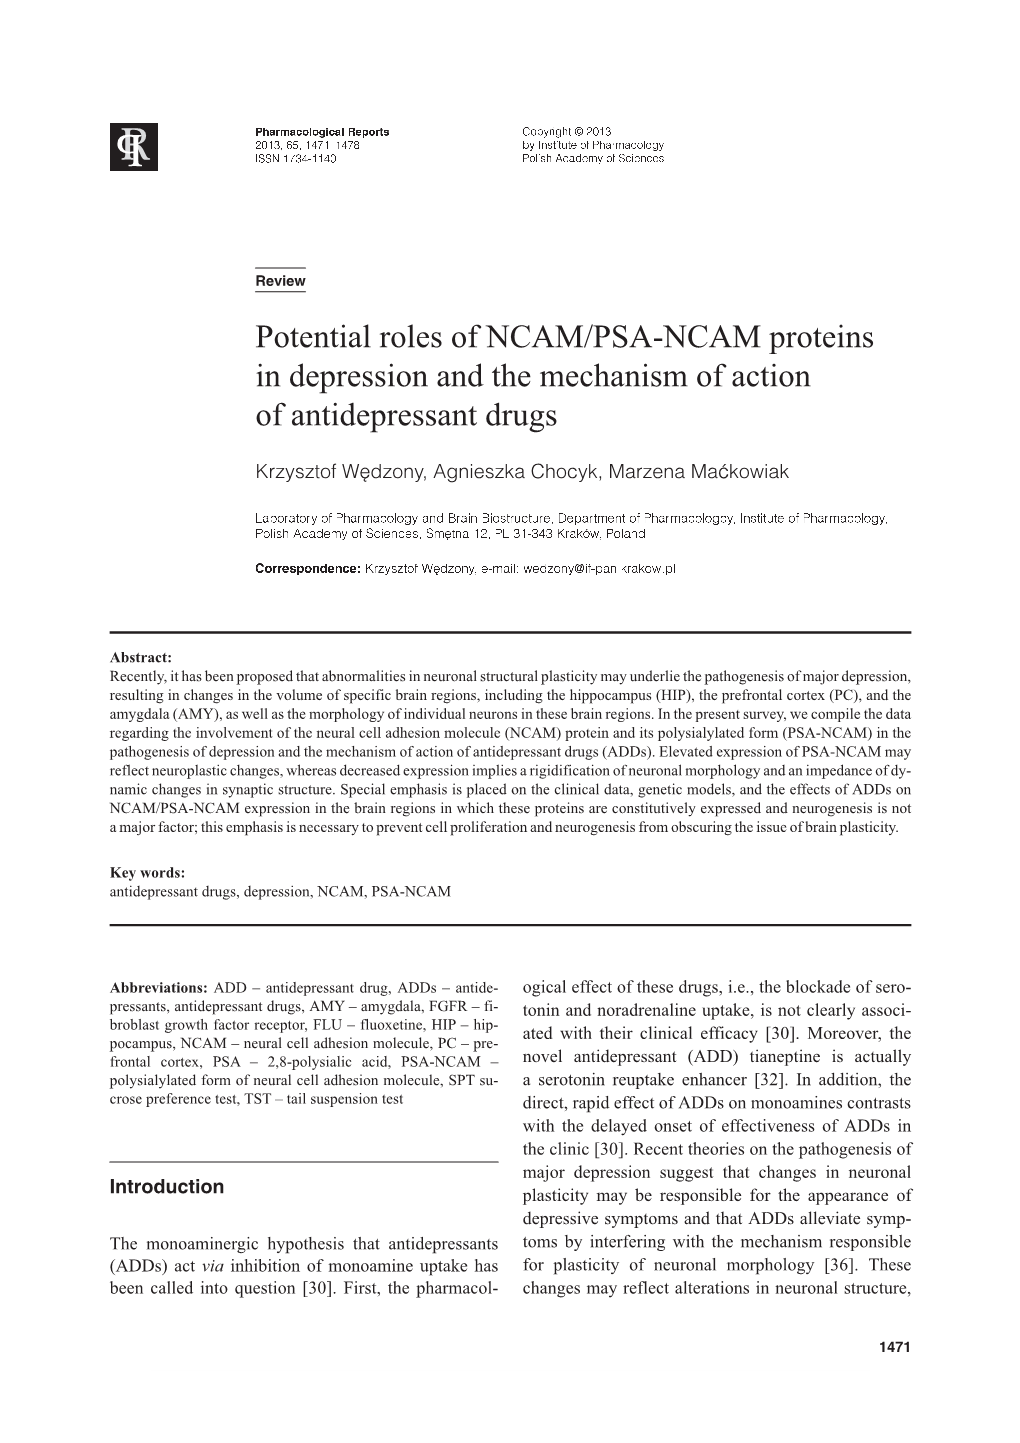 Potential Roles of NCAM/PSA-NCAM Proteins in Depression and The